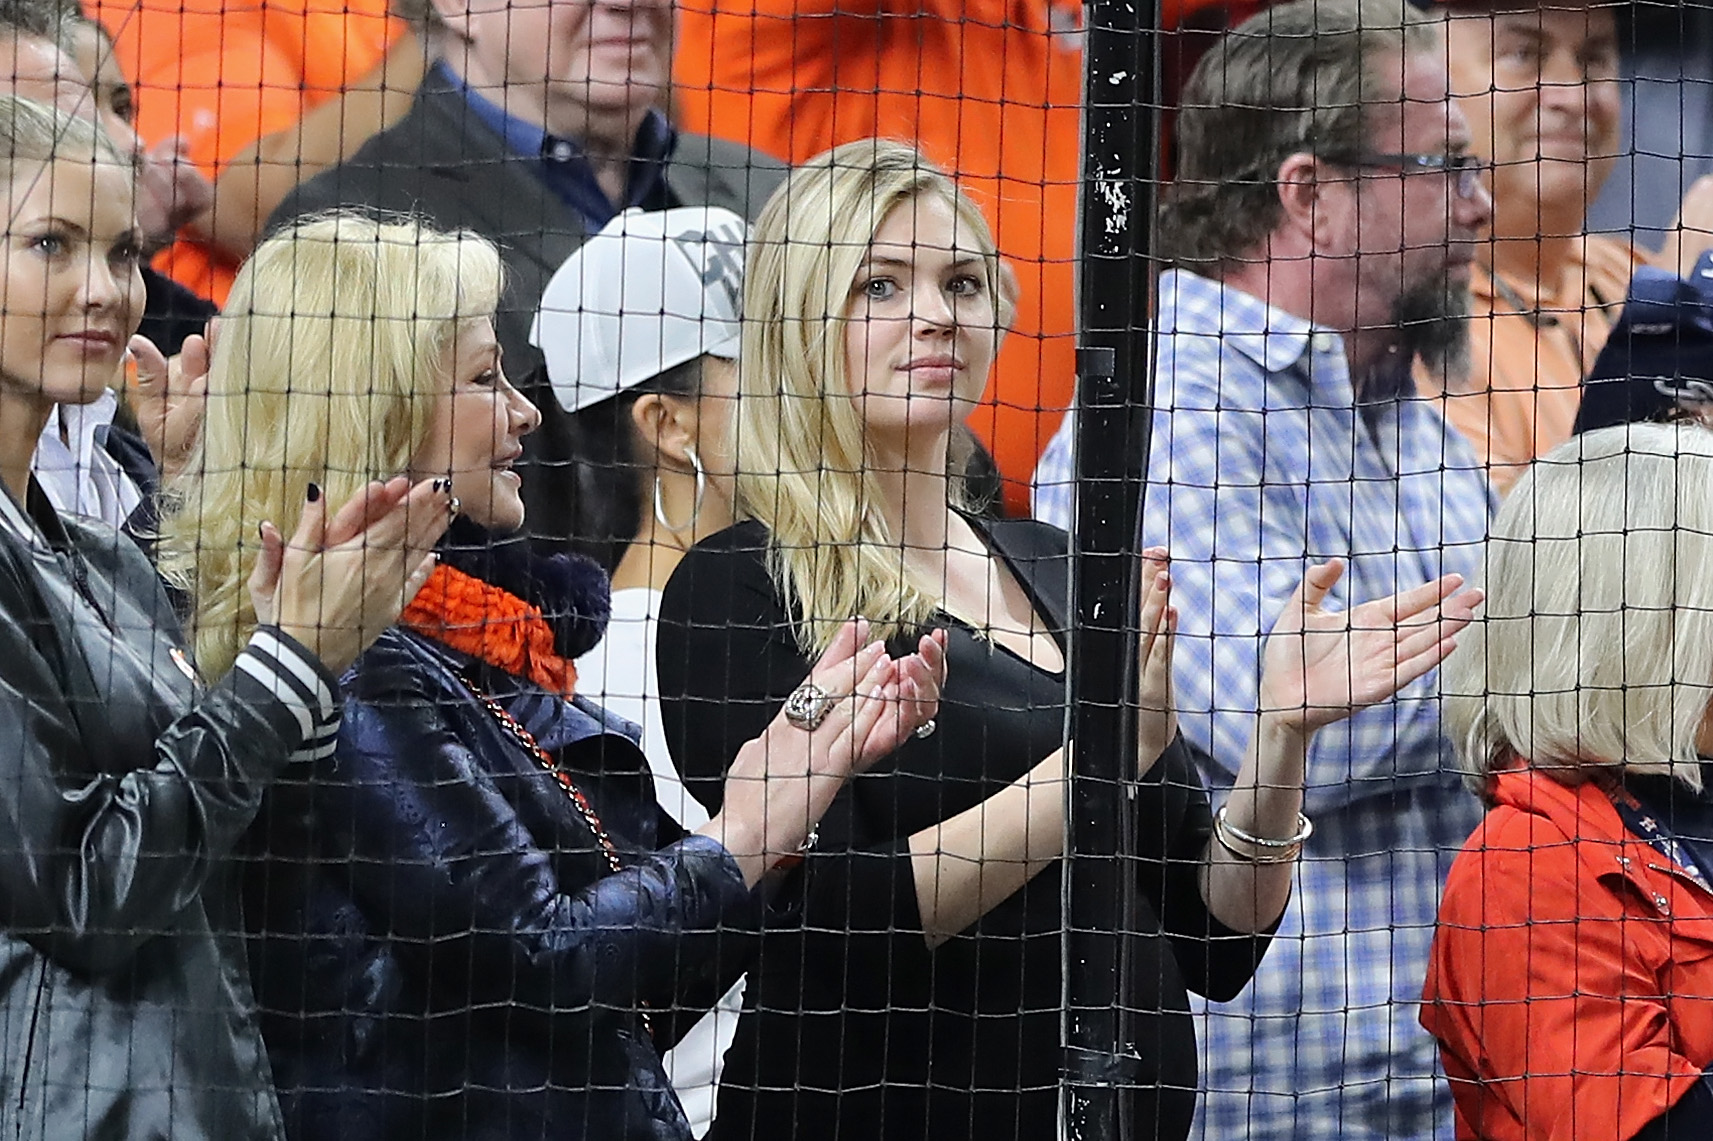 Twitter rejoices as Justin Upton joins Kate Upton in Detroit